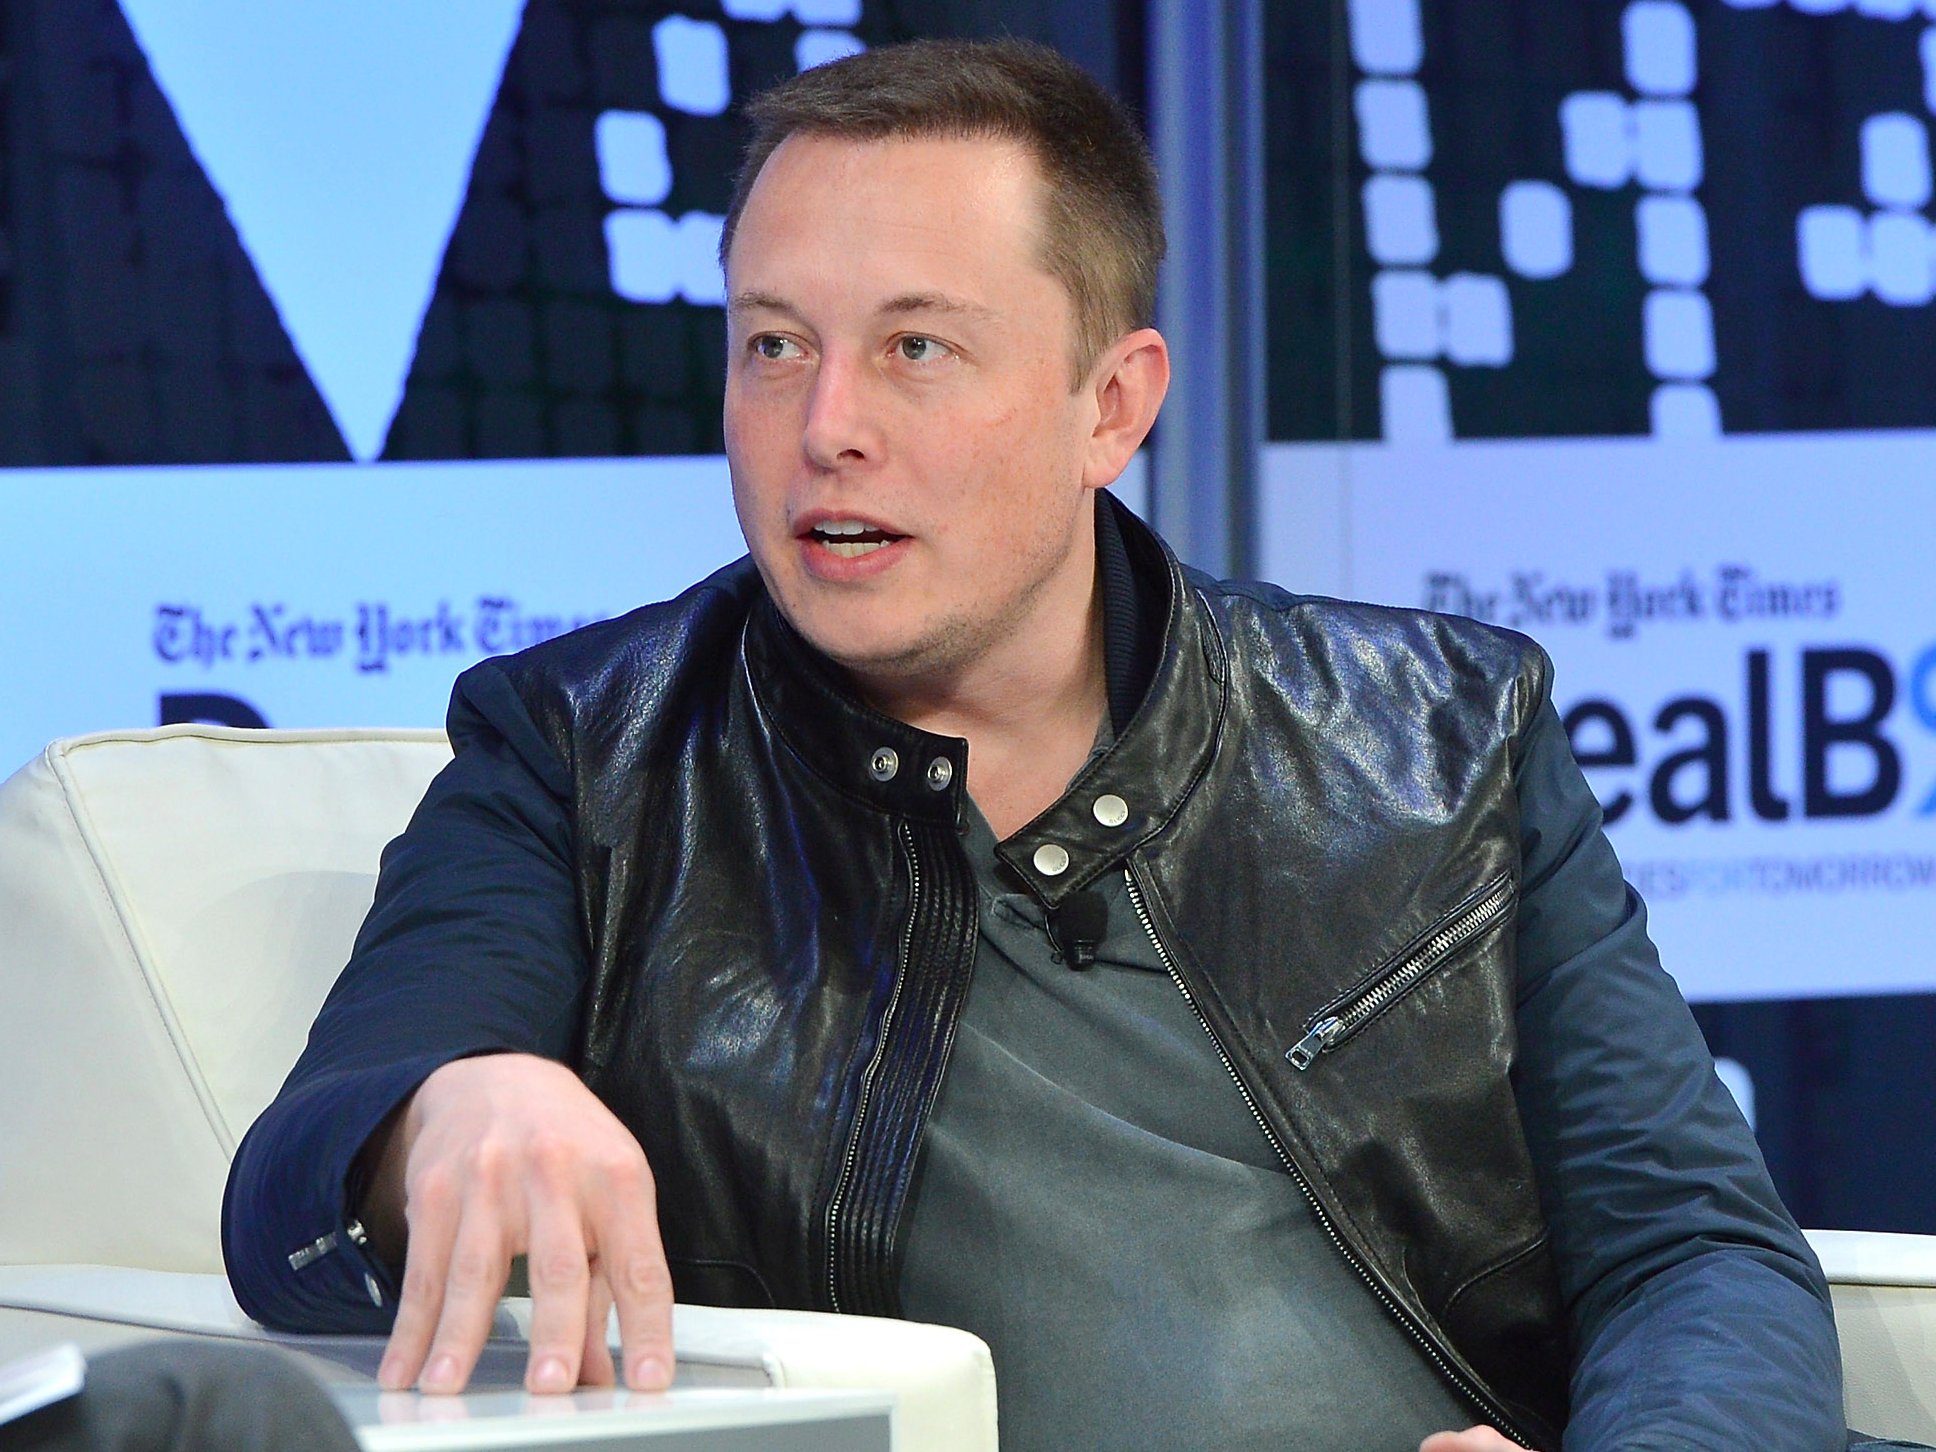 Elon Musk van Tesla en SpaceX. Foto: Larry Busacca/Getty Images for The New York Times